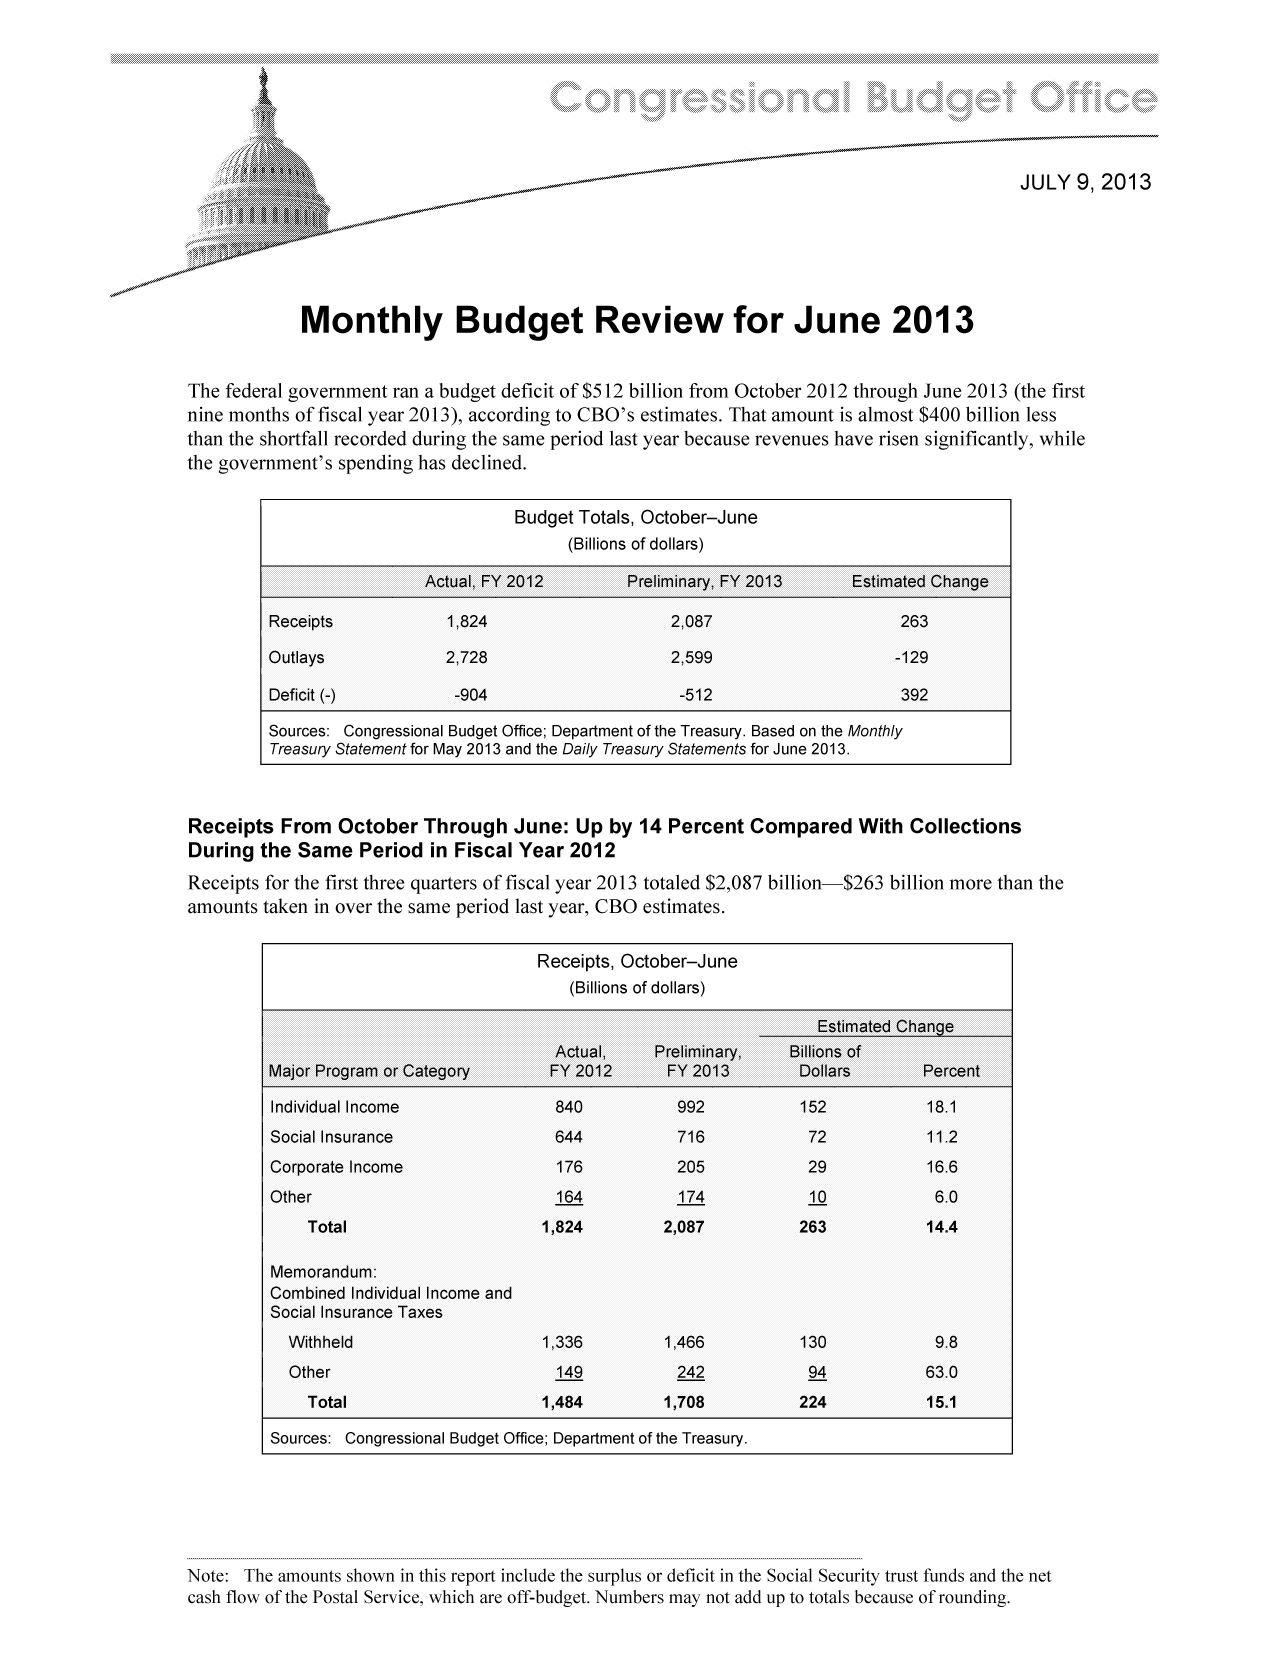 handle is hein.congrec/cbo11215 and id is 1 raw text is: . ..... ..... ... ..  , .  .JU                                                         LY  9.2 0 13
.  .  \ \ \ \ \ \\. . . . .. . ... . .
Monthly Budget Review for June 2013
The federal government ran a budget deficit of $512 billion from October 2012 through June 2013 (the first
nine months of fiscal year 2013), according to CBO's estimates. That amount is almost $400 billion less
than the shortfall recorded during the same period last year because revenues have risen significantly, while
the government's spending has declined.
Budget Totals, October-June
(Billions of dollars)
Actual, FY 2012       Preliminary, FY 2013    Estimated Change
Receipts           1,824                    2,087                   263
Outlays            2,728                    2,599                   -129
Deficit (-)         -904                    -512                    392
Sources: Congressional Budget Office; Department of the Treasury. Based on the Monthly
Treasury Statement for May 2013 and the Daily Treasury Statements for June 2013.
Receipts From October Through June: Up by 14 Percent Compared With Collections
During the Same Period in Fiscal Year 2012
Receipts for the first three quarters of fiscal year 2013 totaled $2,087 billion-$263 billion more than the
amounts taken in over the same period last year, CBO estimates.
Receipts, October-June
(Billions of dollars)

Sources: Congressional Budget Office; Department of the Treasury.

Note: The amounts shown in this report include the surplus or deficit in the Social Security trust funds and the net
cash flow of the Postal Service, which are off-budget. Numbers may not add up to totals because of rounding.


